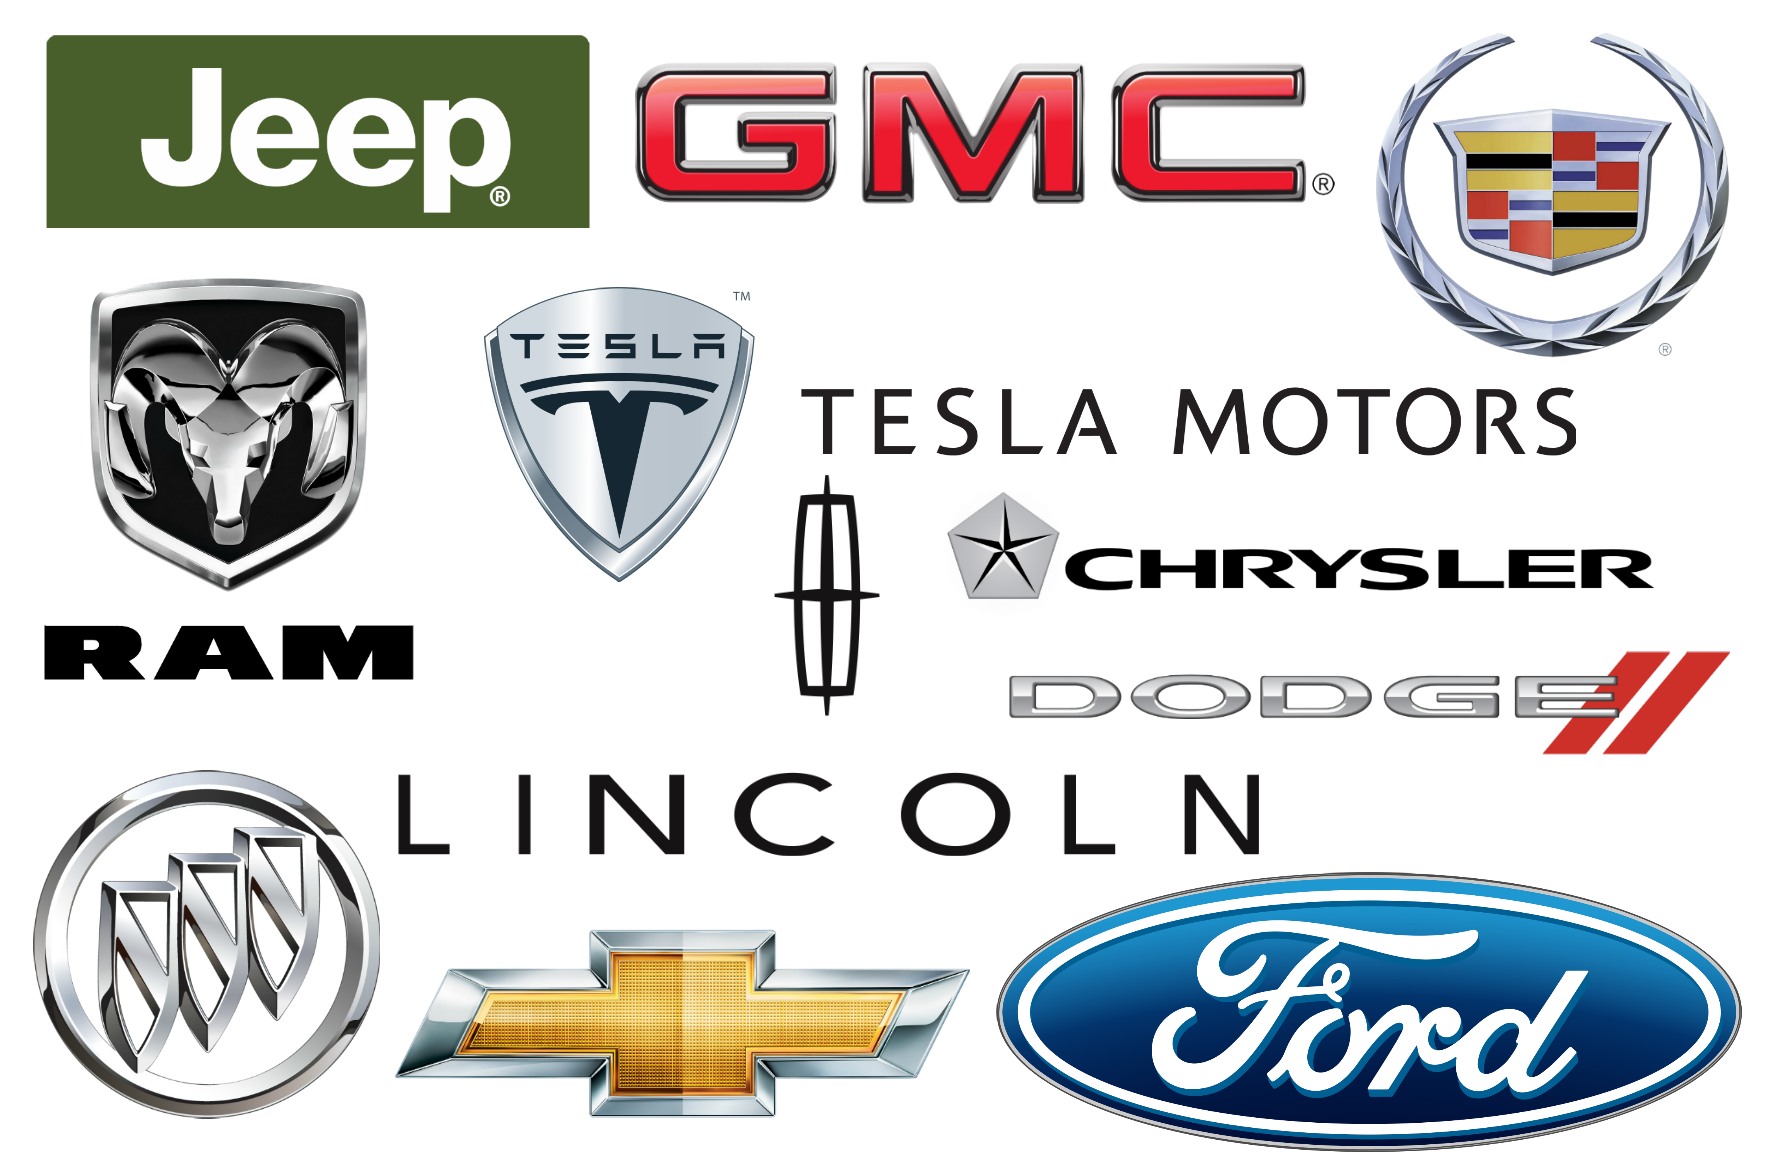 American Car Brands Names - List And Logos Of US Cars